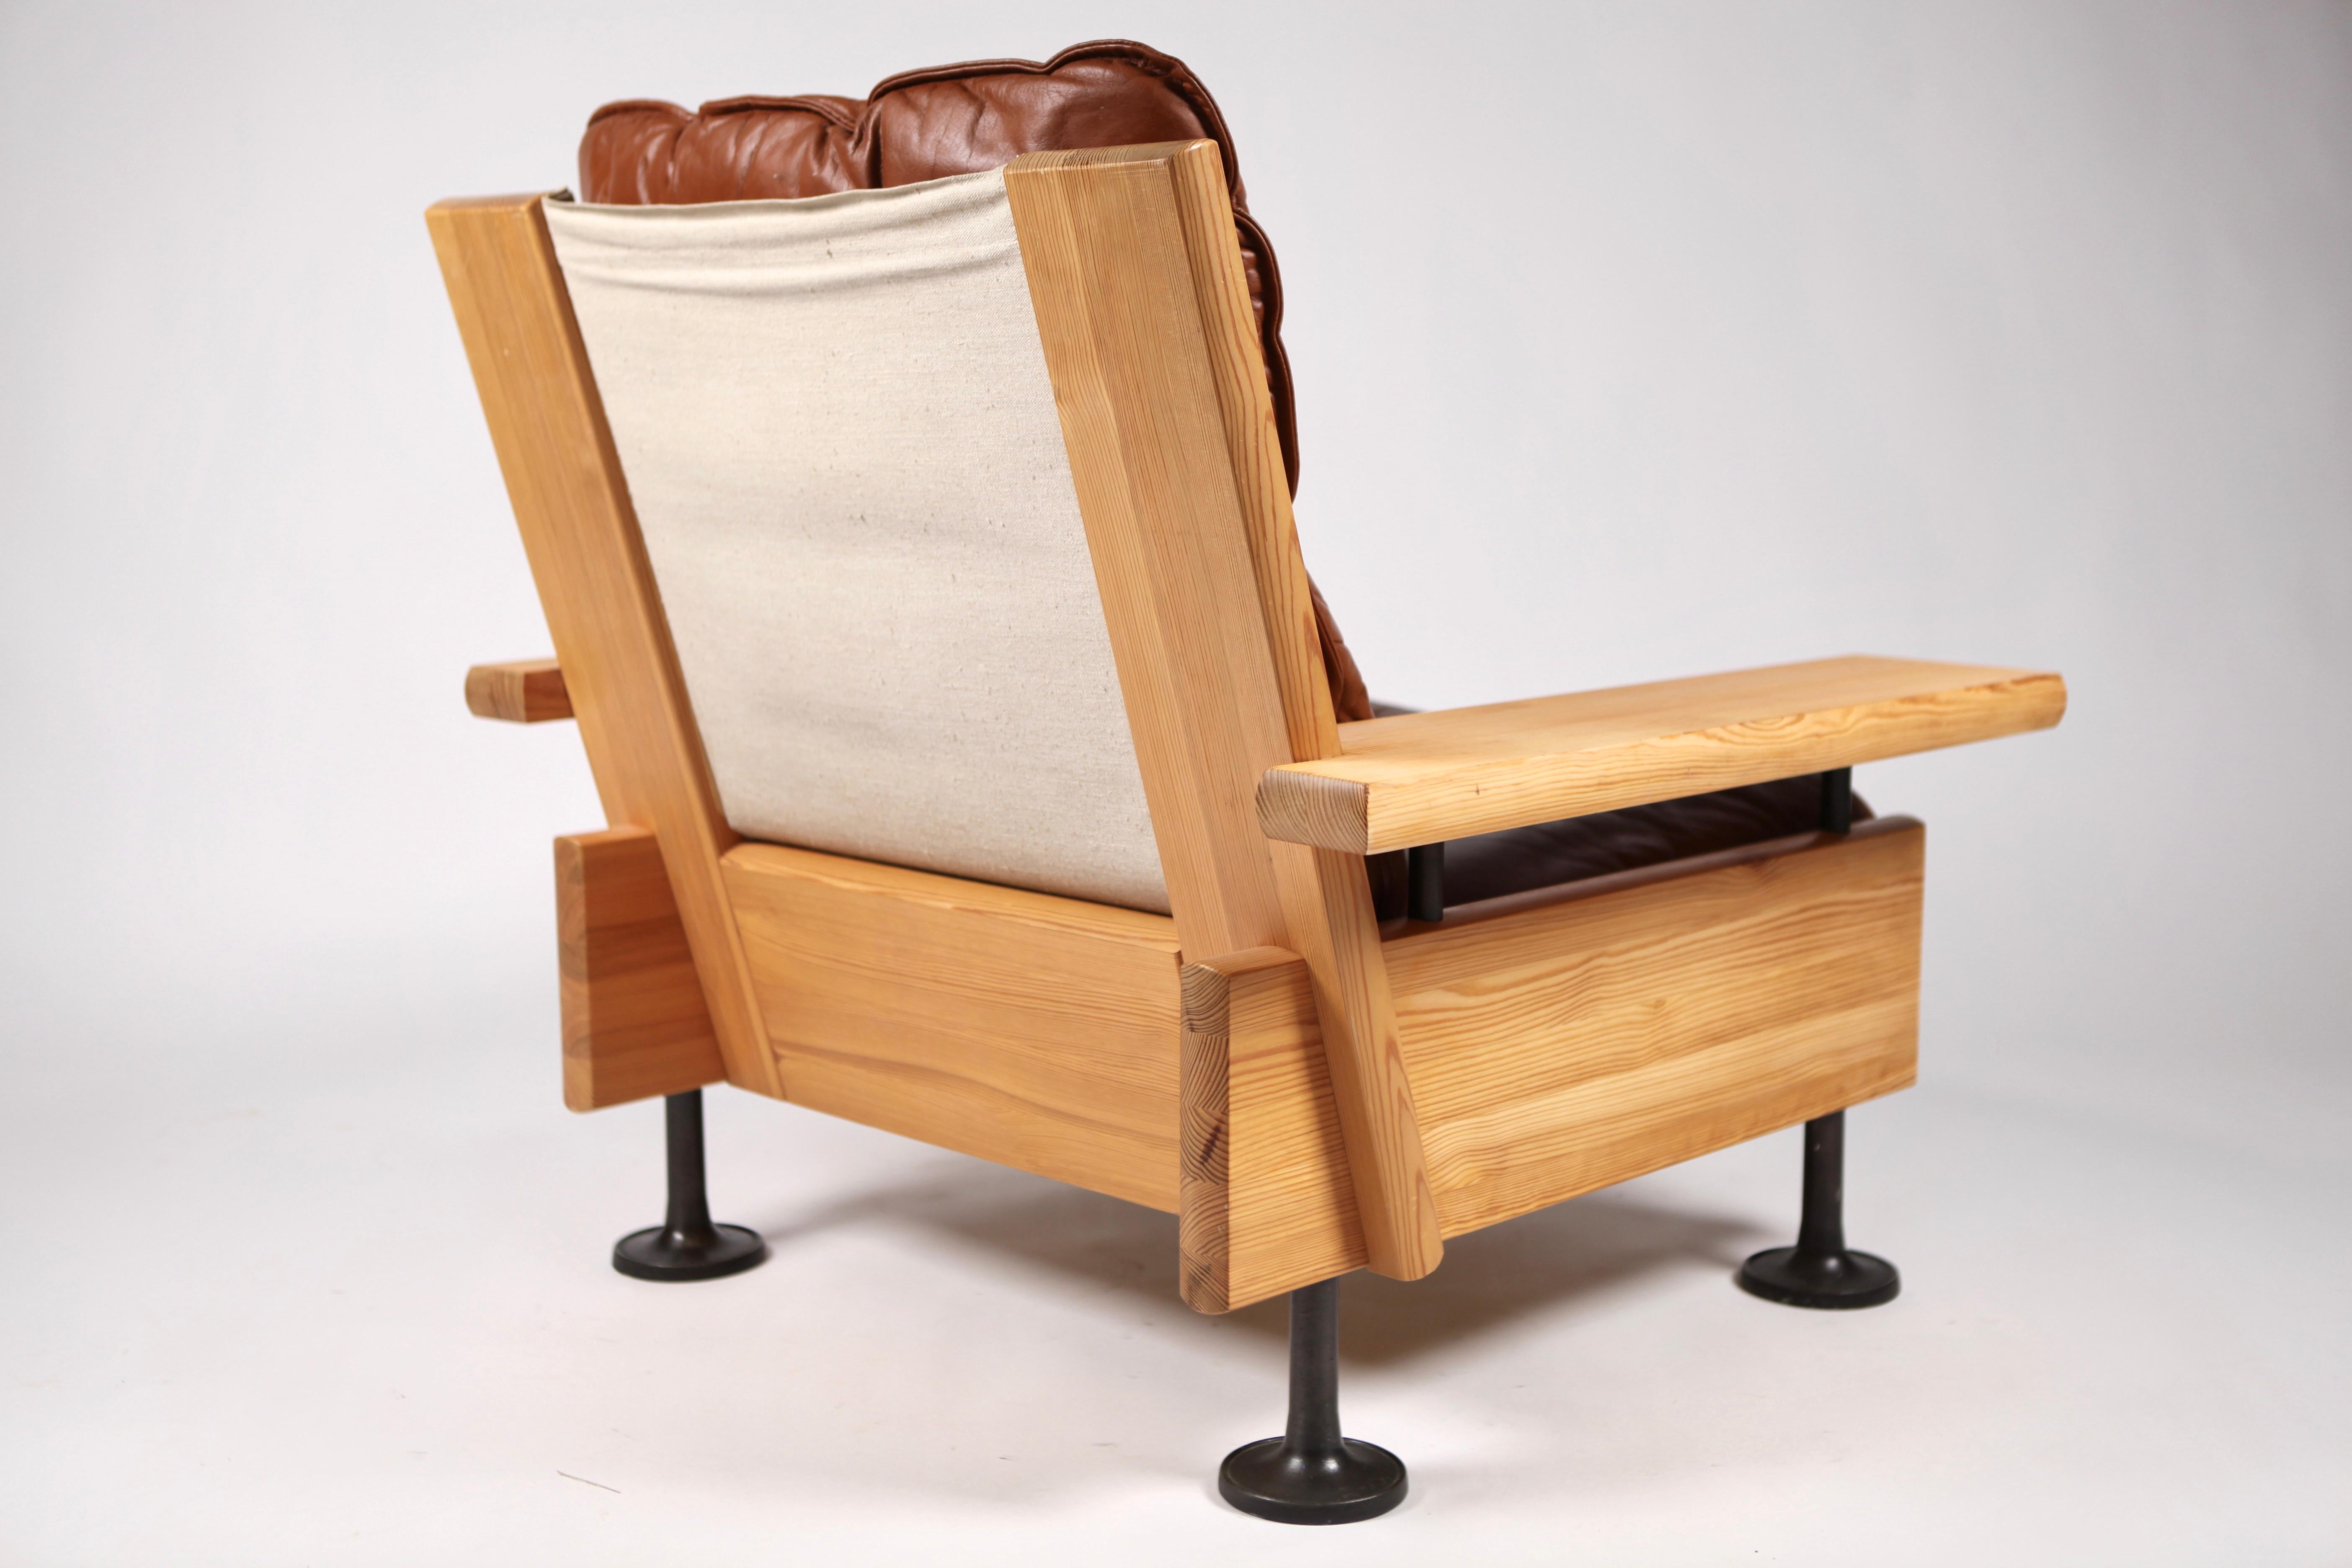 Finnish Hannu Jyräs, Pair of Unique Easy Armchairs in Oregon Pine and Leather, 1970s